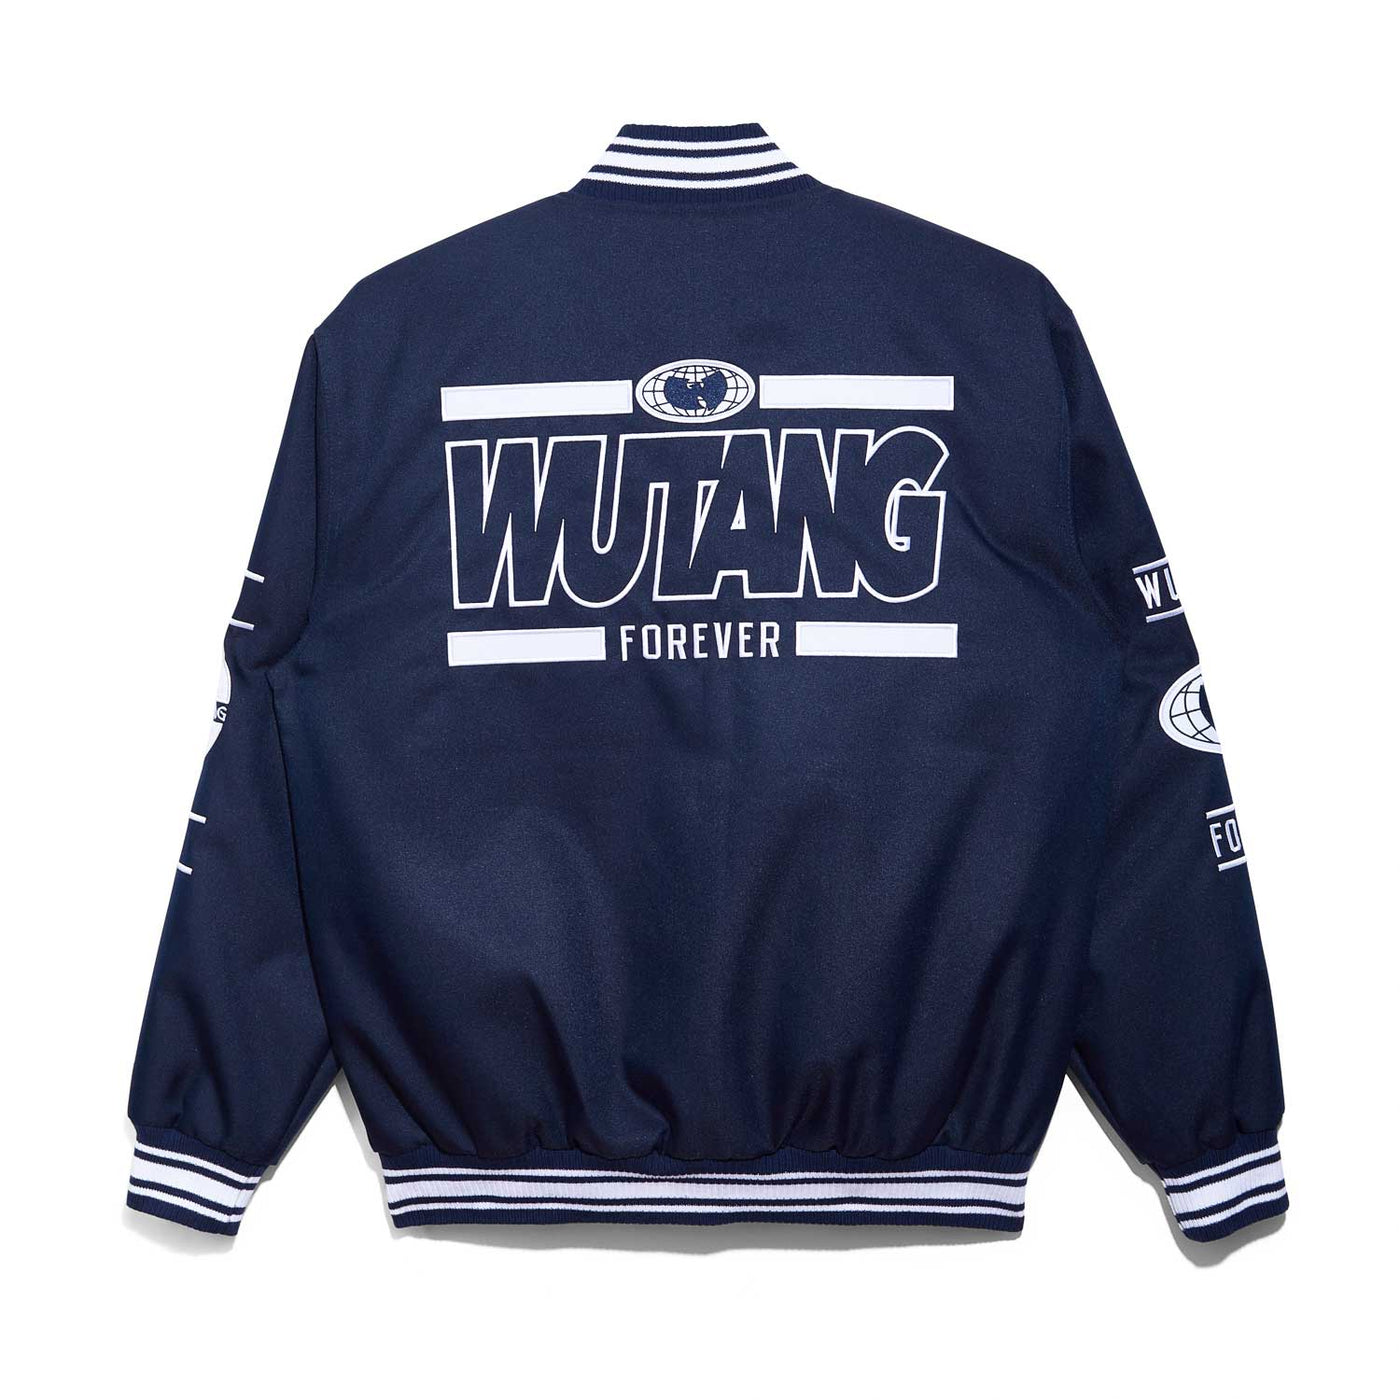 All-City Jacket Navy and White